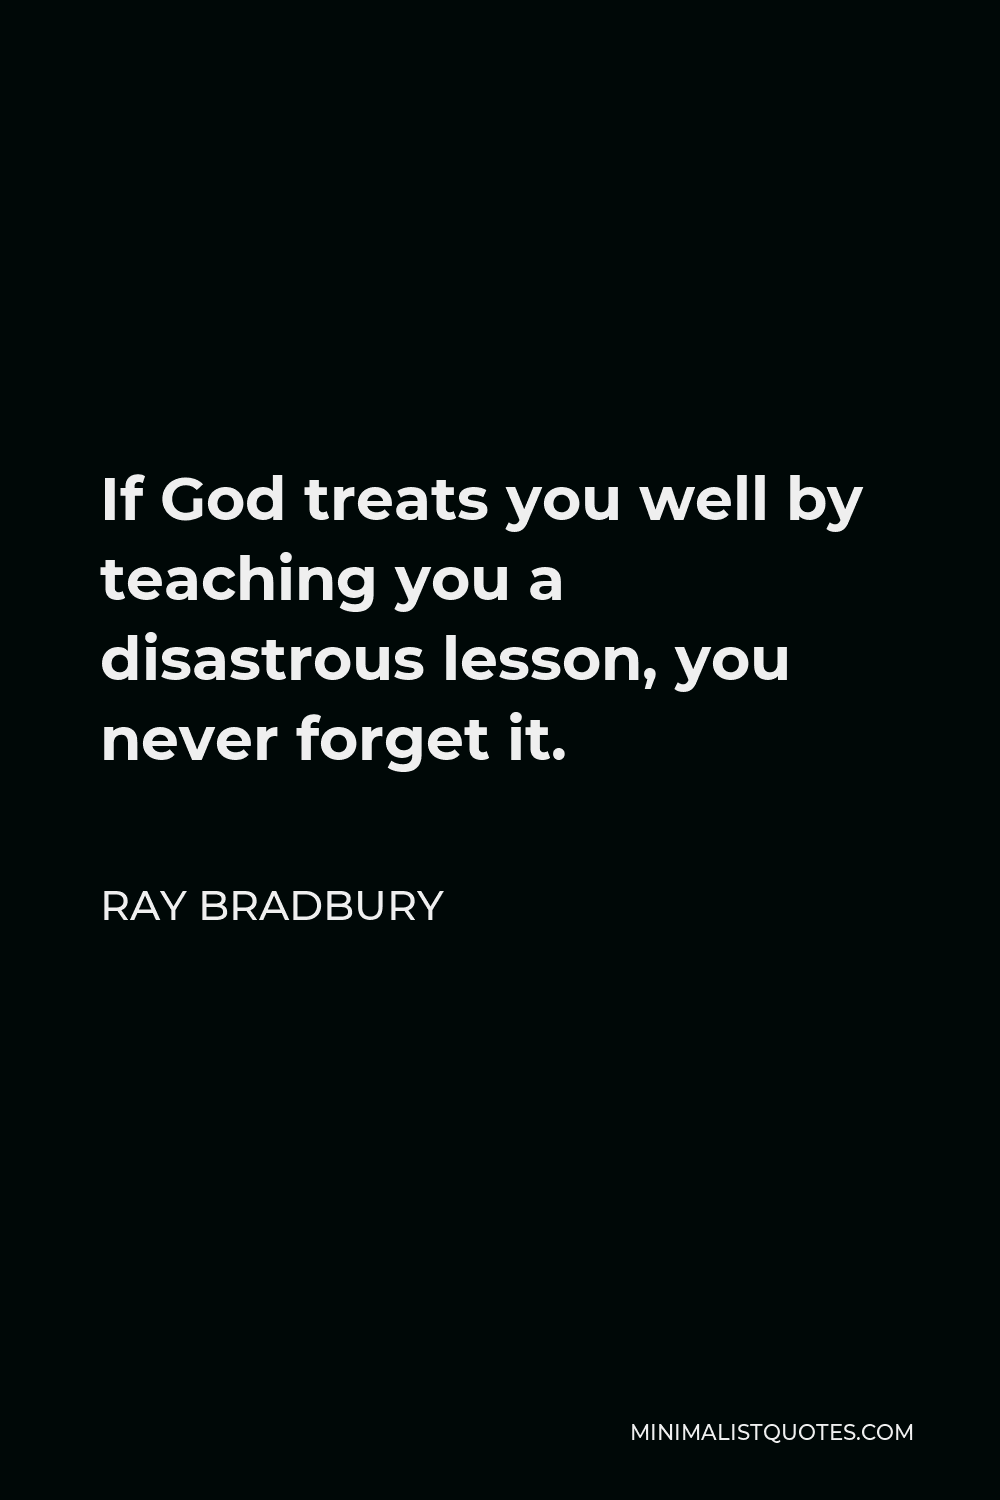 Ray Bradbury Quote - If God treats you well by teaching you a disastrous lesson, you never forget it.